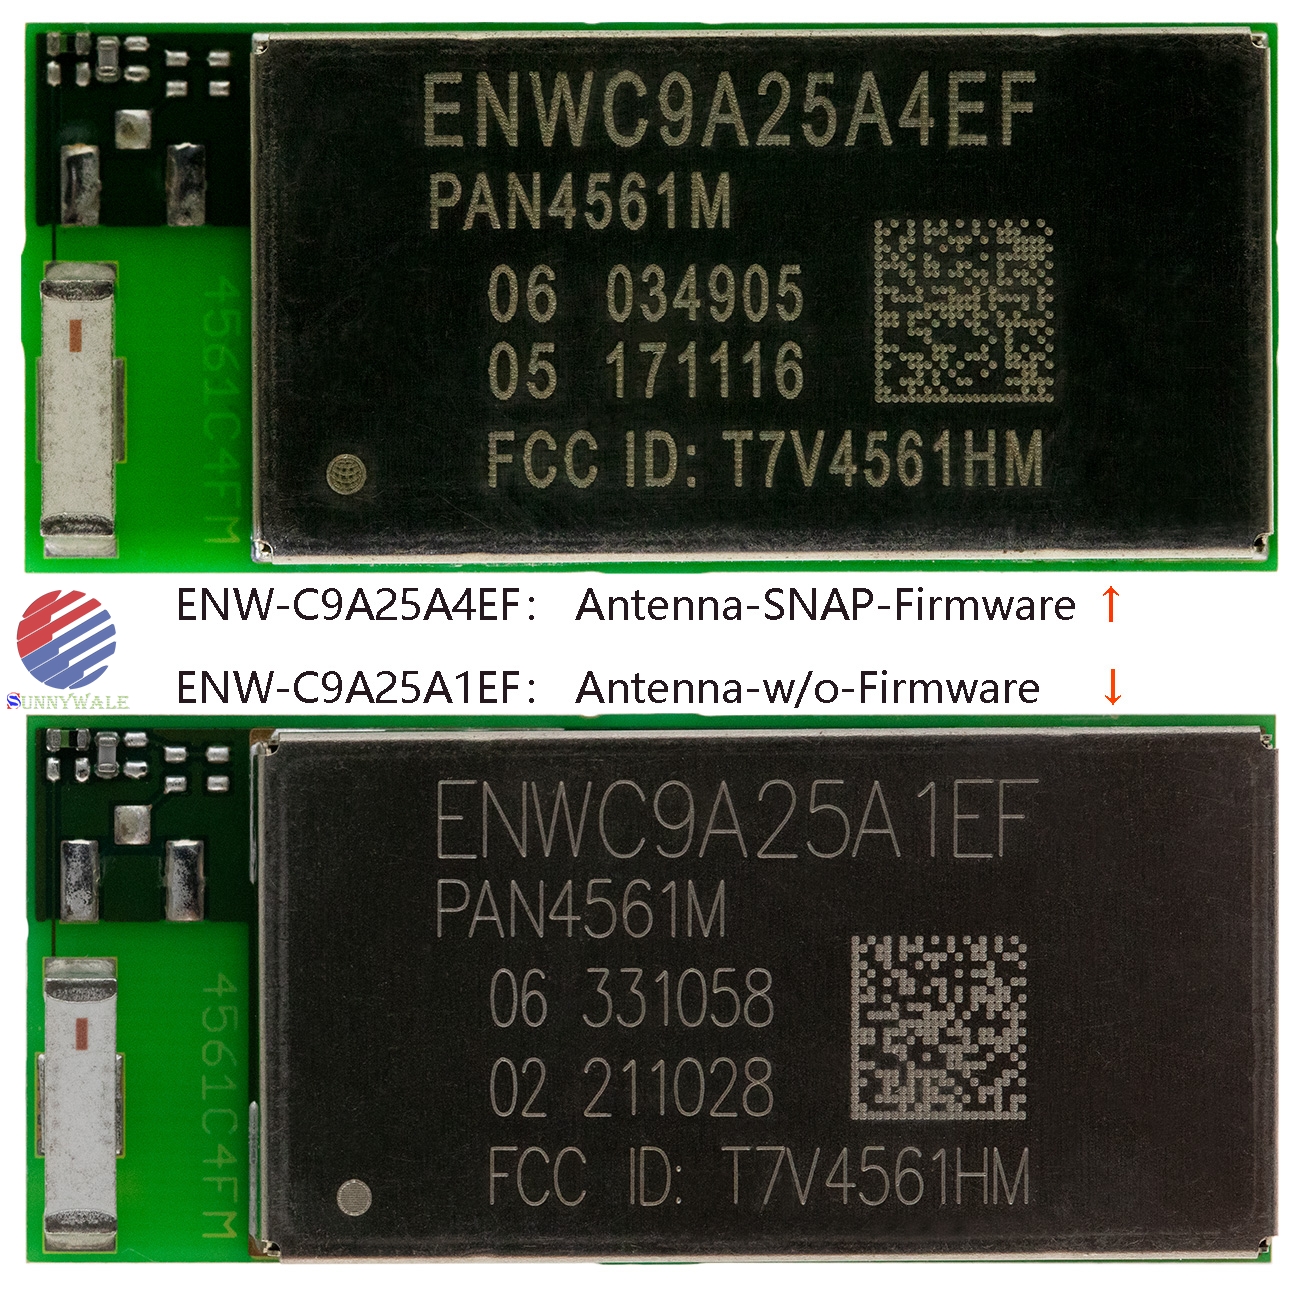 PAN4561M, Panasonic mesh network 800 ft (32 m) RF module, ENWC9A25A1EF, ENWC9A25A4EF, IEEE802.15.4 module, remote 2.4GHz ISM band transceiver, SOC based on Freescale